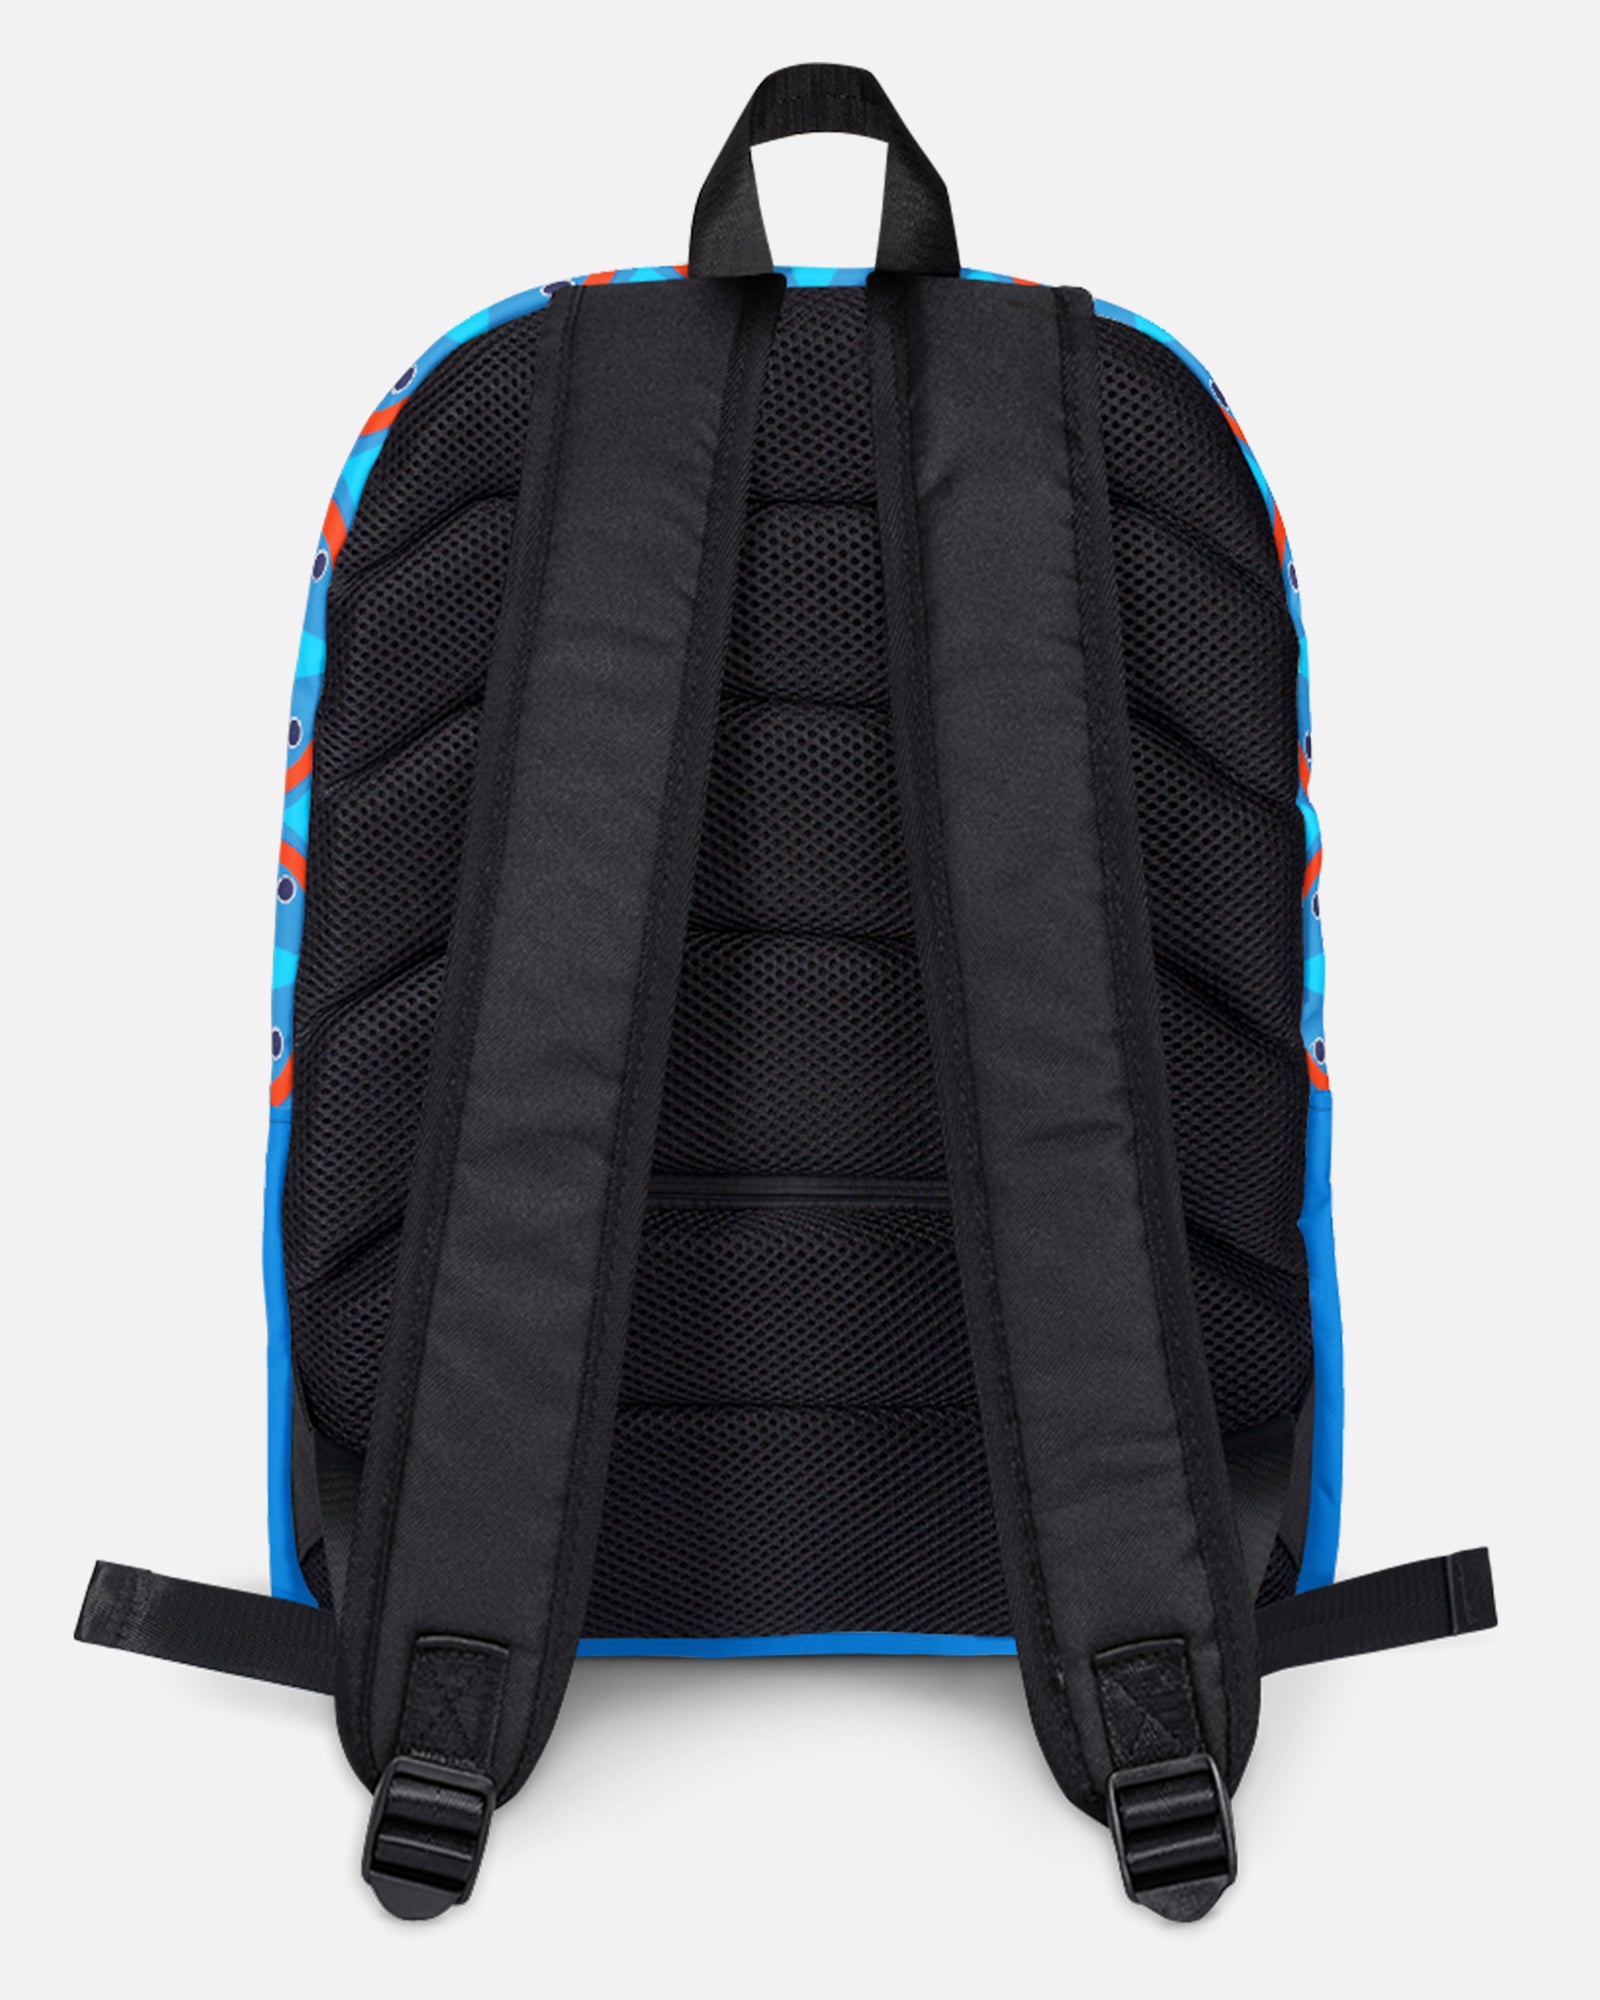 huggy wuggy attack backpack back. two straps. mesh back.